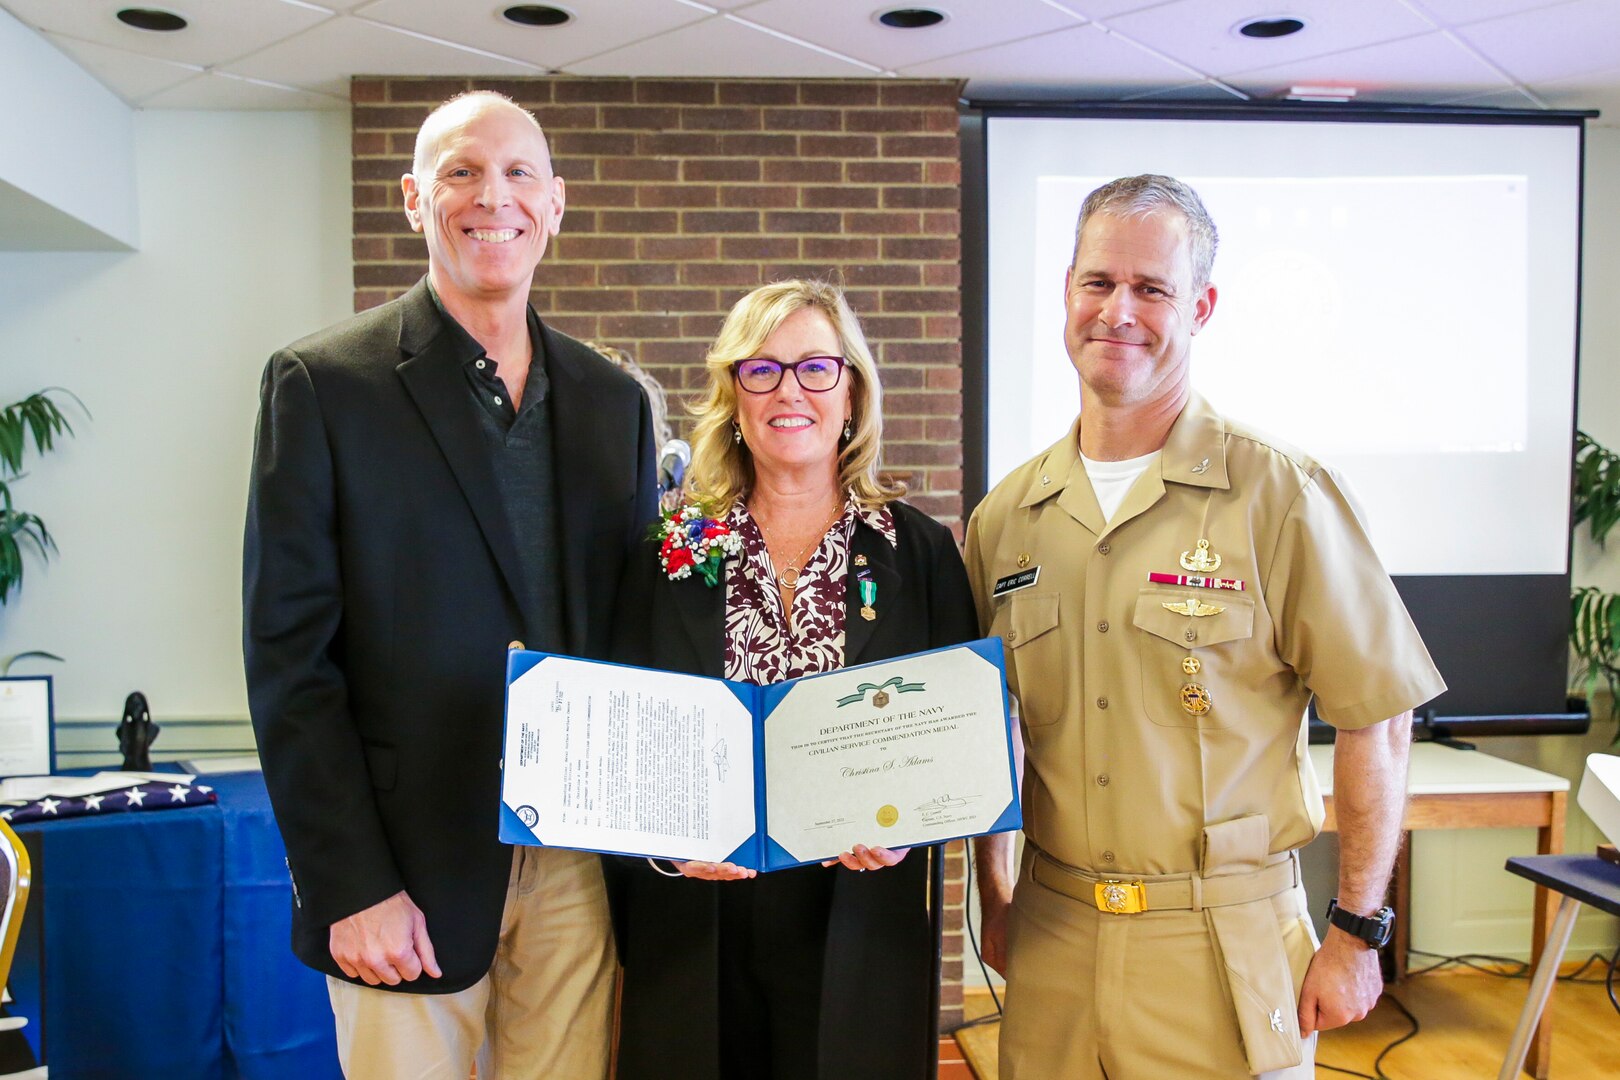 Former NSWC IHD Business Director Christina Adams poses with the Civilian Service Commendation Medal alongside NSWC IHD Technical Director Ashley Johnson and Commanding Officer Capt. Eric Correll during her retirement ceremony, Sept. 29.